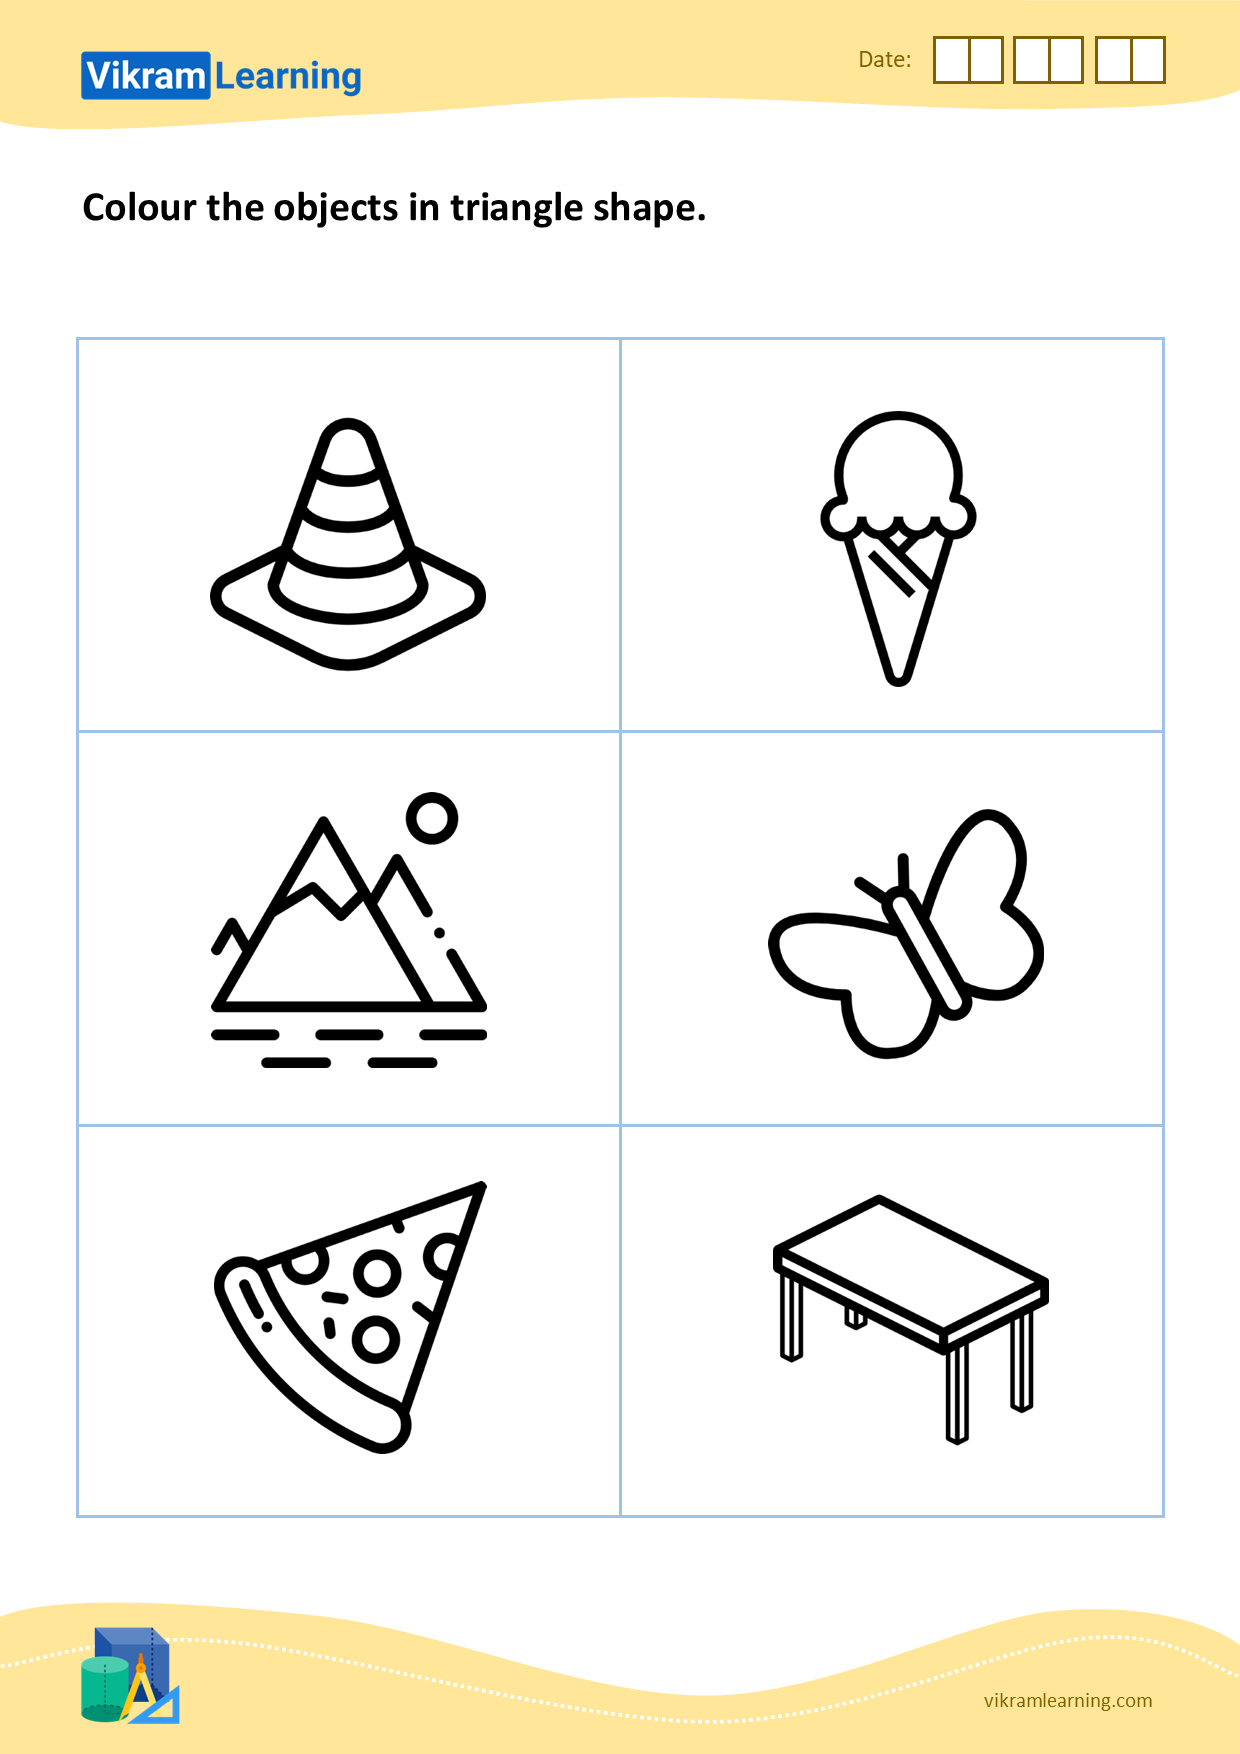 Colour the objects in triangle shape